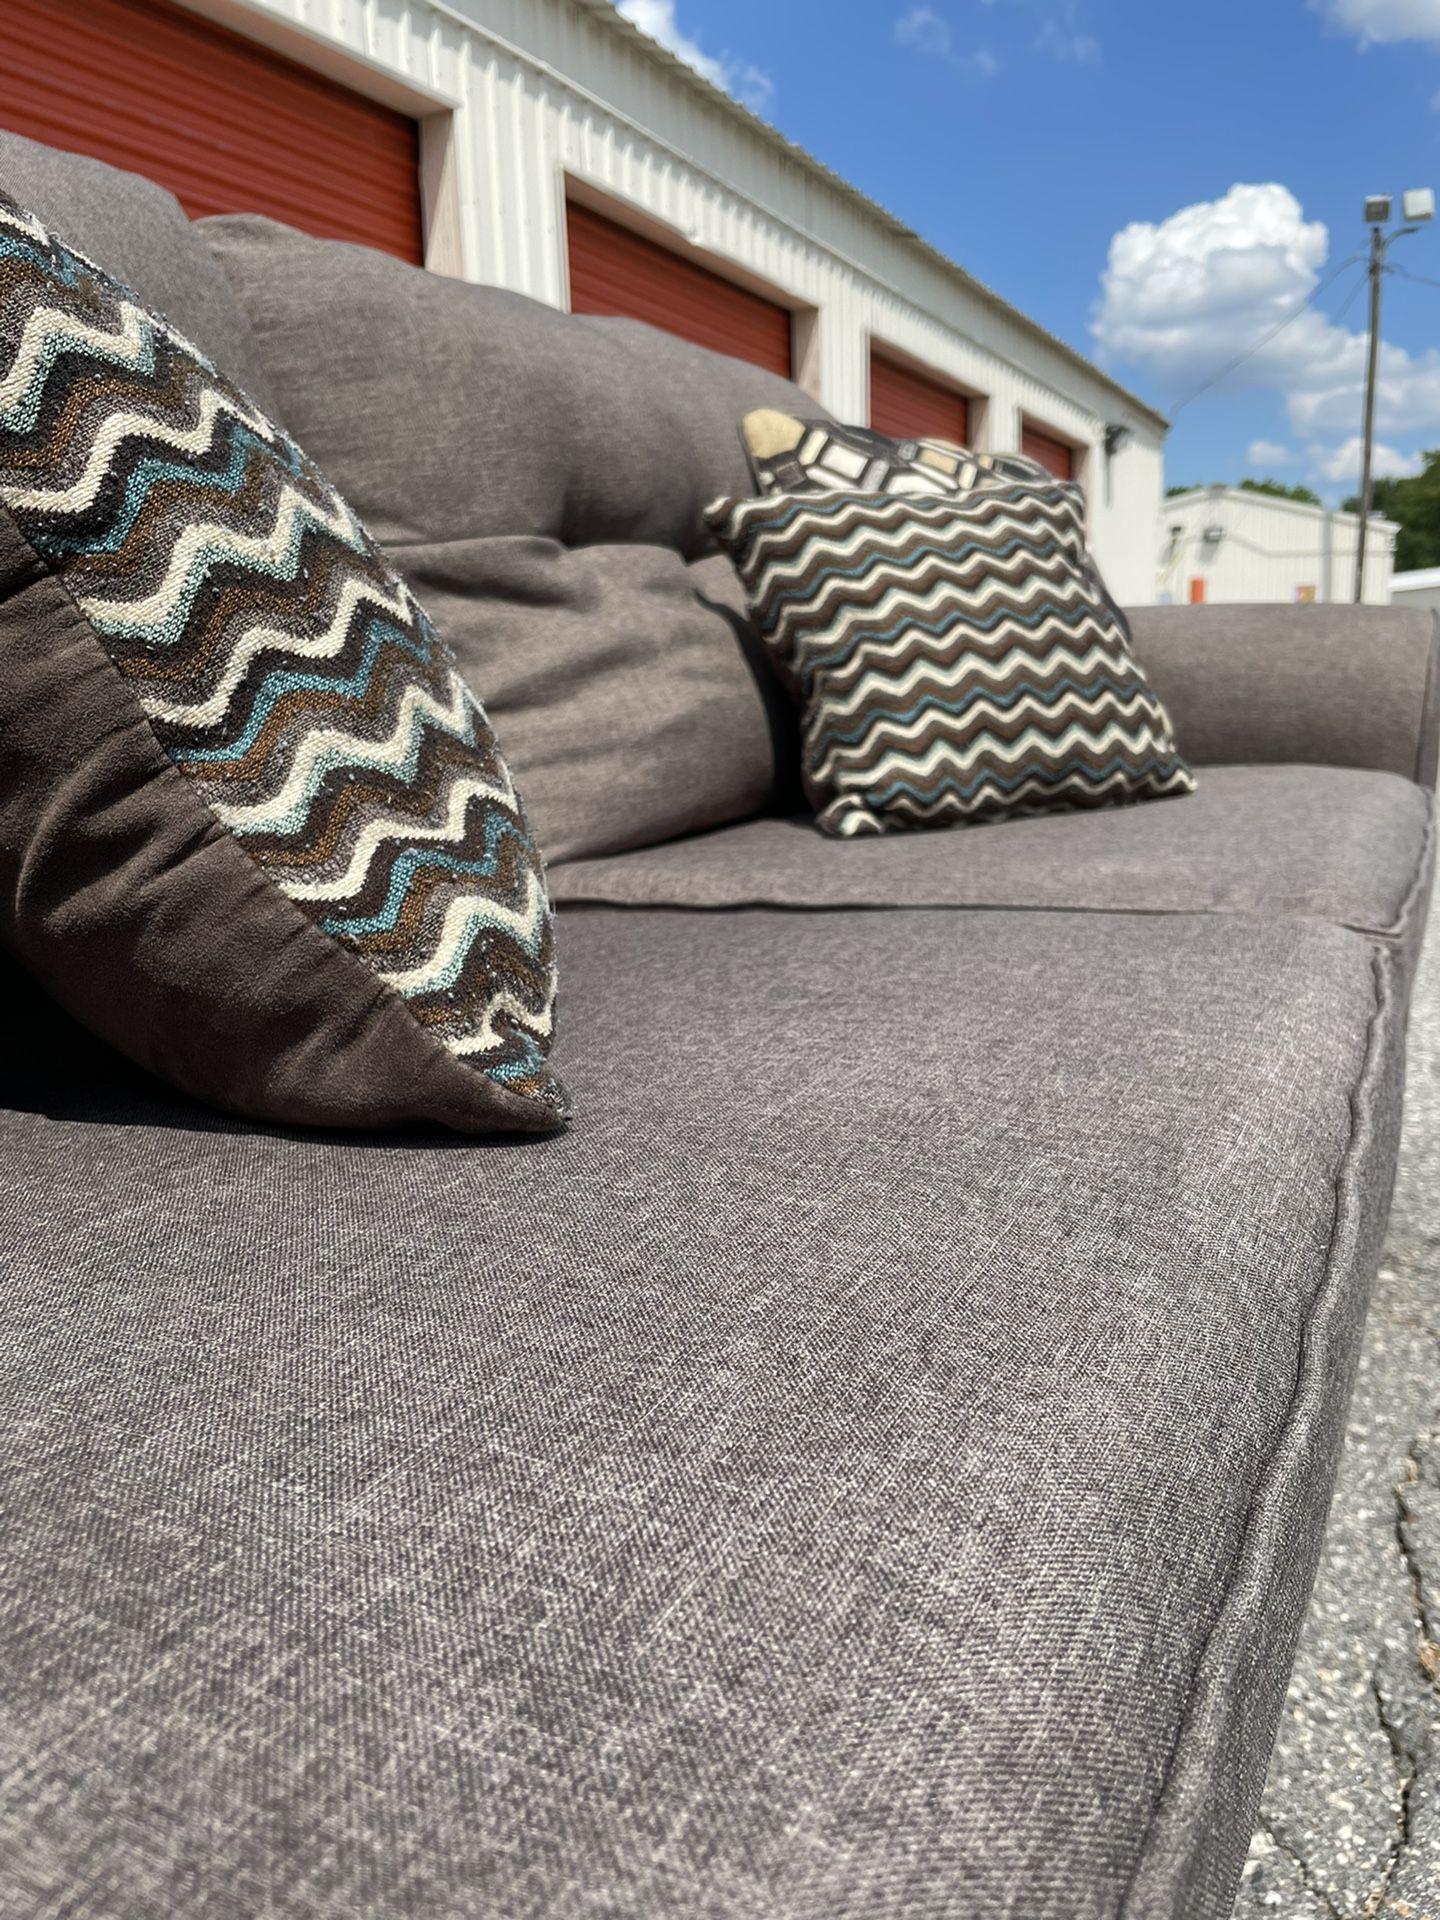 Free Delivery - Ashley Grey Couch